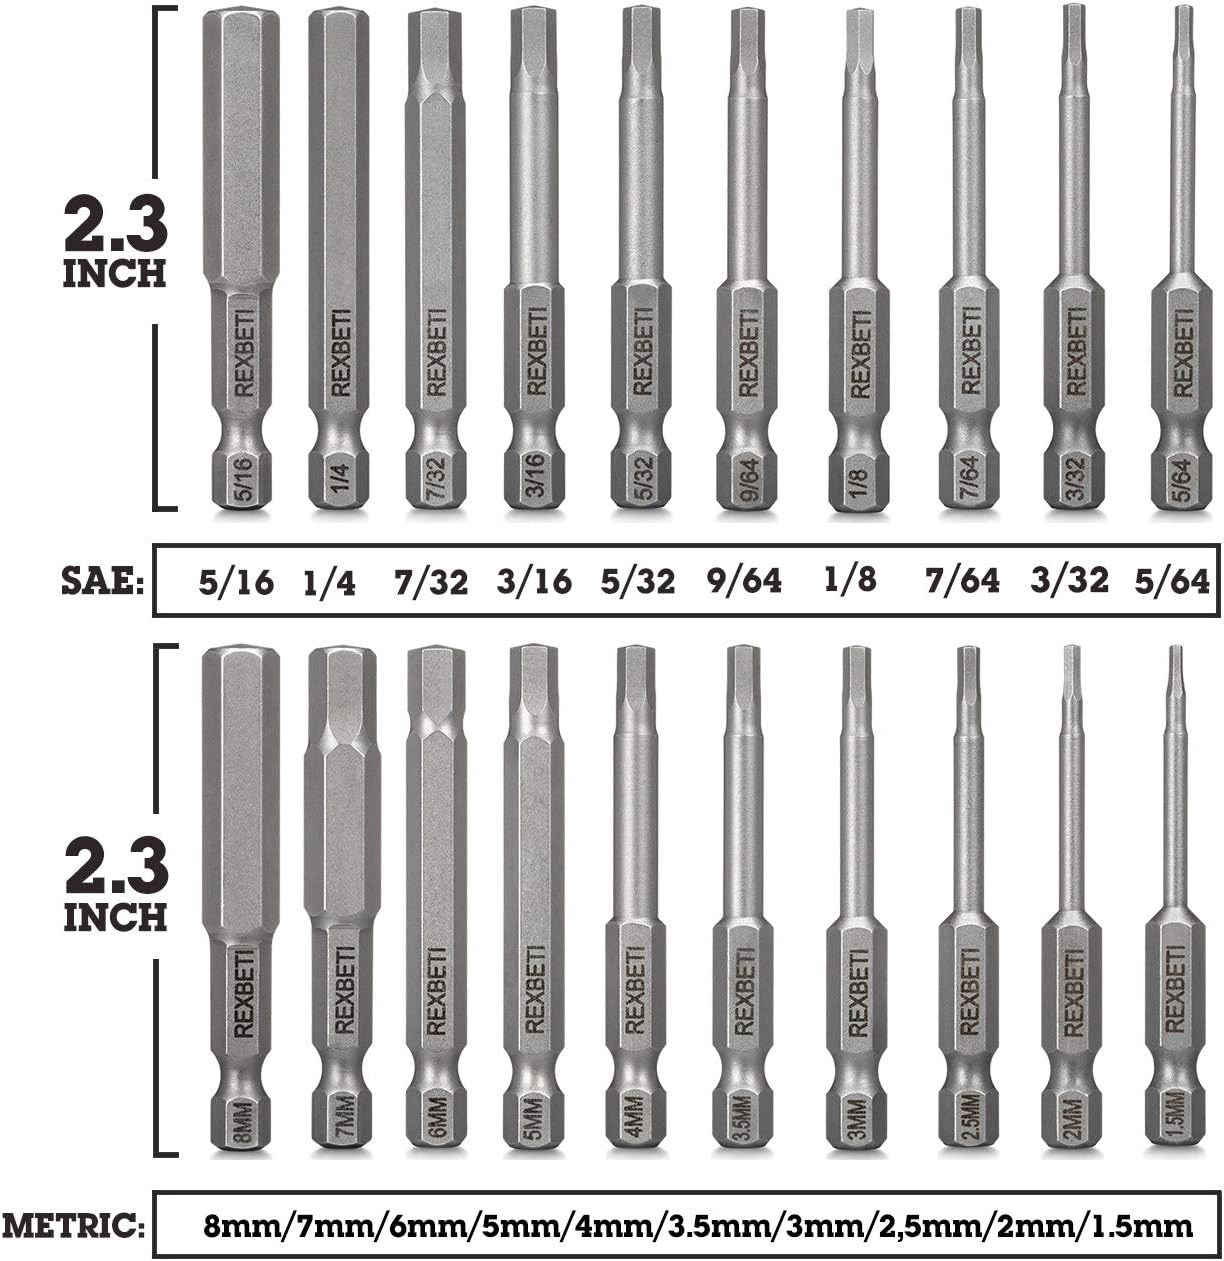 REXBETI 20 Piece Hex Head Allen Wrench Screwdriver Bit Set, SAE Metric 1/4 Inch Hex Shank S2 Steel Magnetic 2.3 Inch Long Drill Bits wi